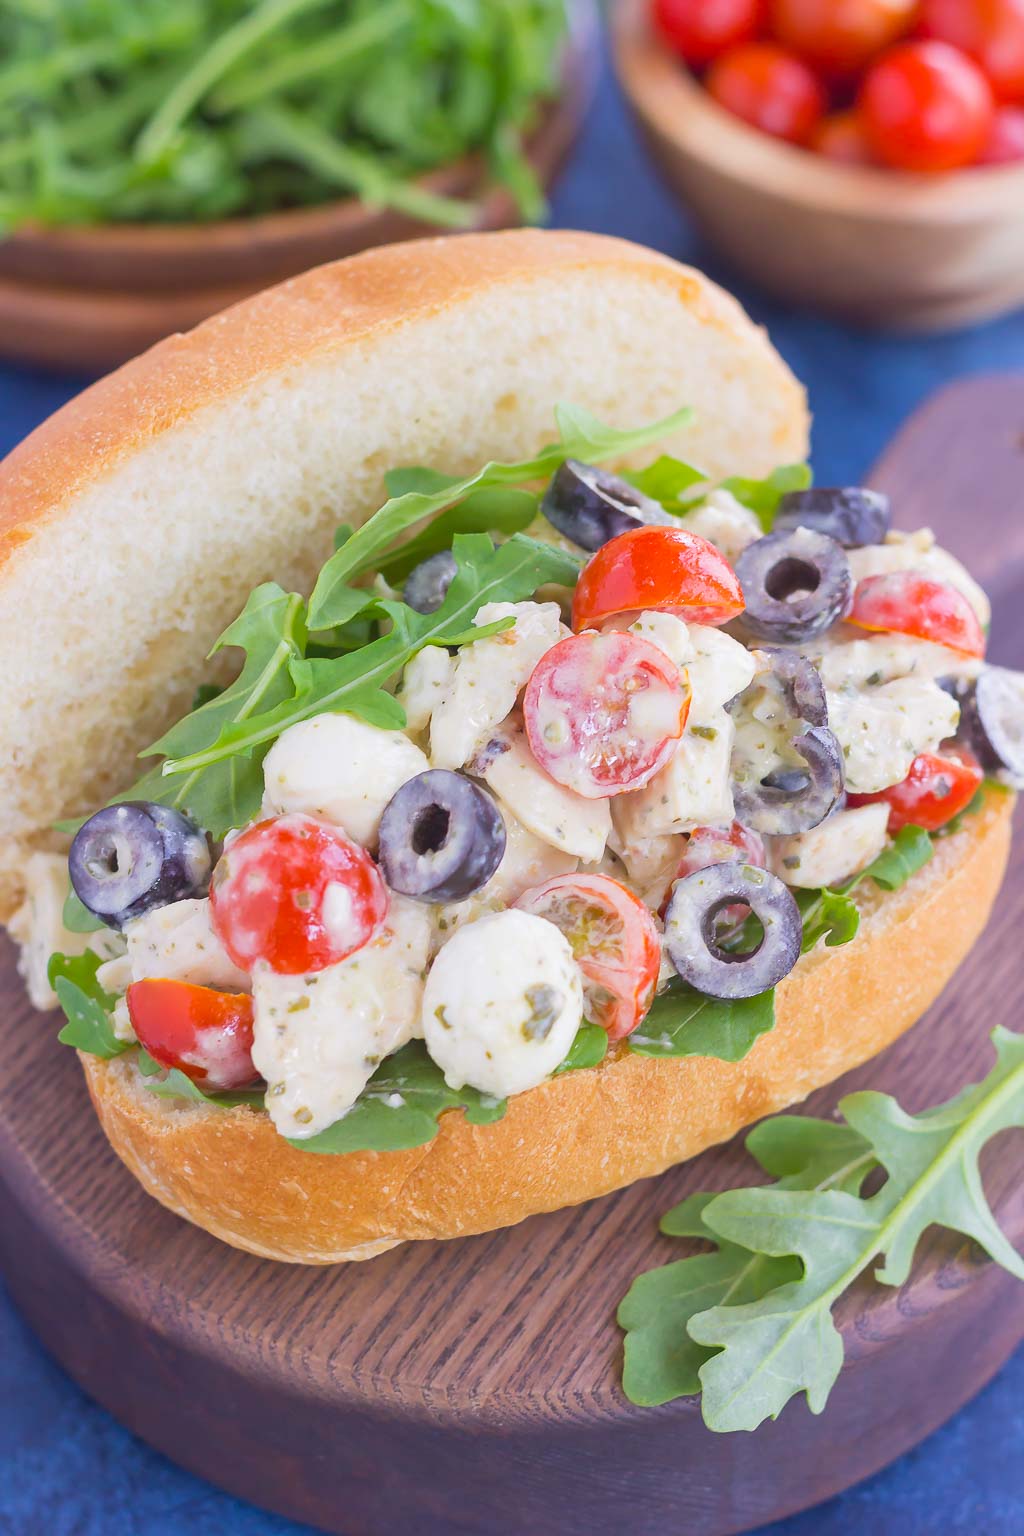 This Italian Chicken Salad is fresh, easy, and bursting with flavor. Loaded with mozzarella cheese, tomatoes, black olives and pesto, this fun twist on a classic flavor will have you coming back for more. This salad is perfect for an easy lunch or dinner and makes delicious sandwiches, too!